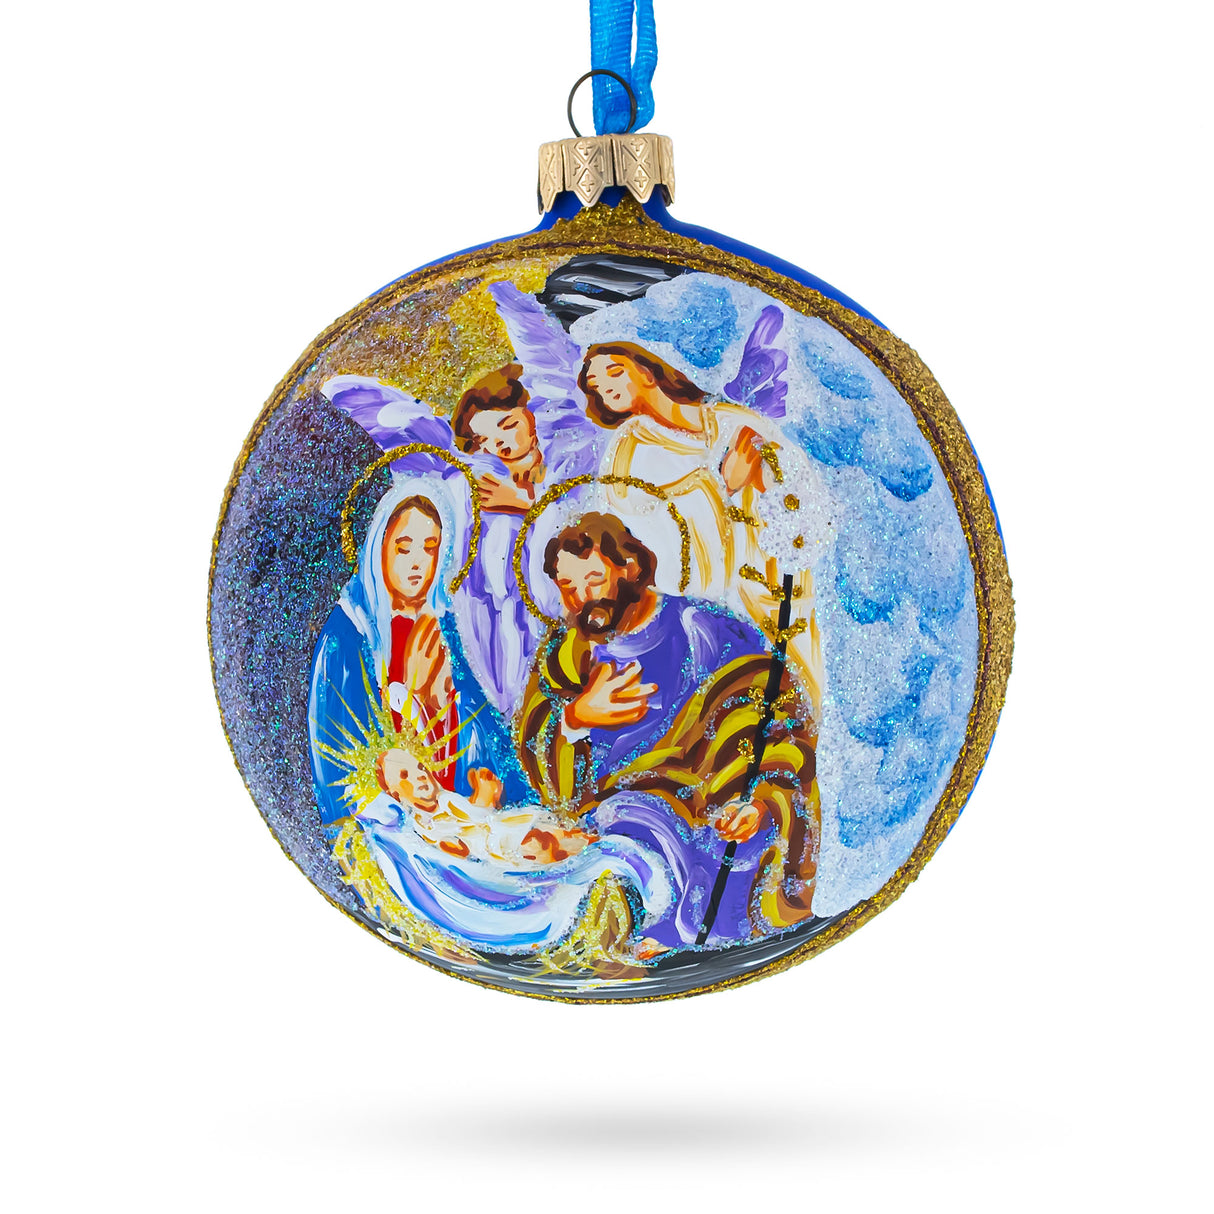 Glass Divine Angels Admiring Jesus Nativity Scene - Blown Glass Ball Christmas Ornament 4 Inches in Blue color Round